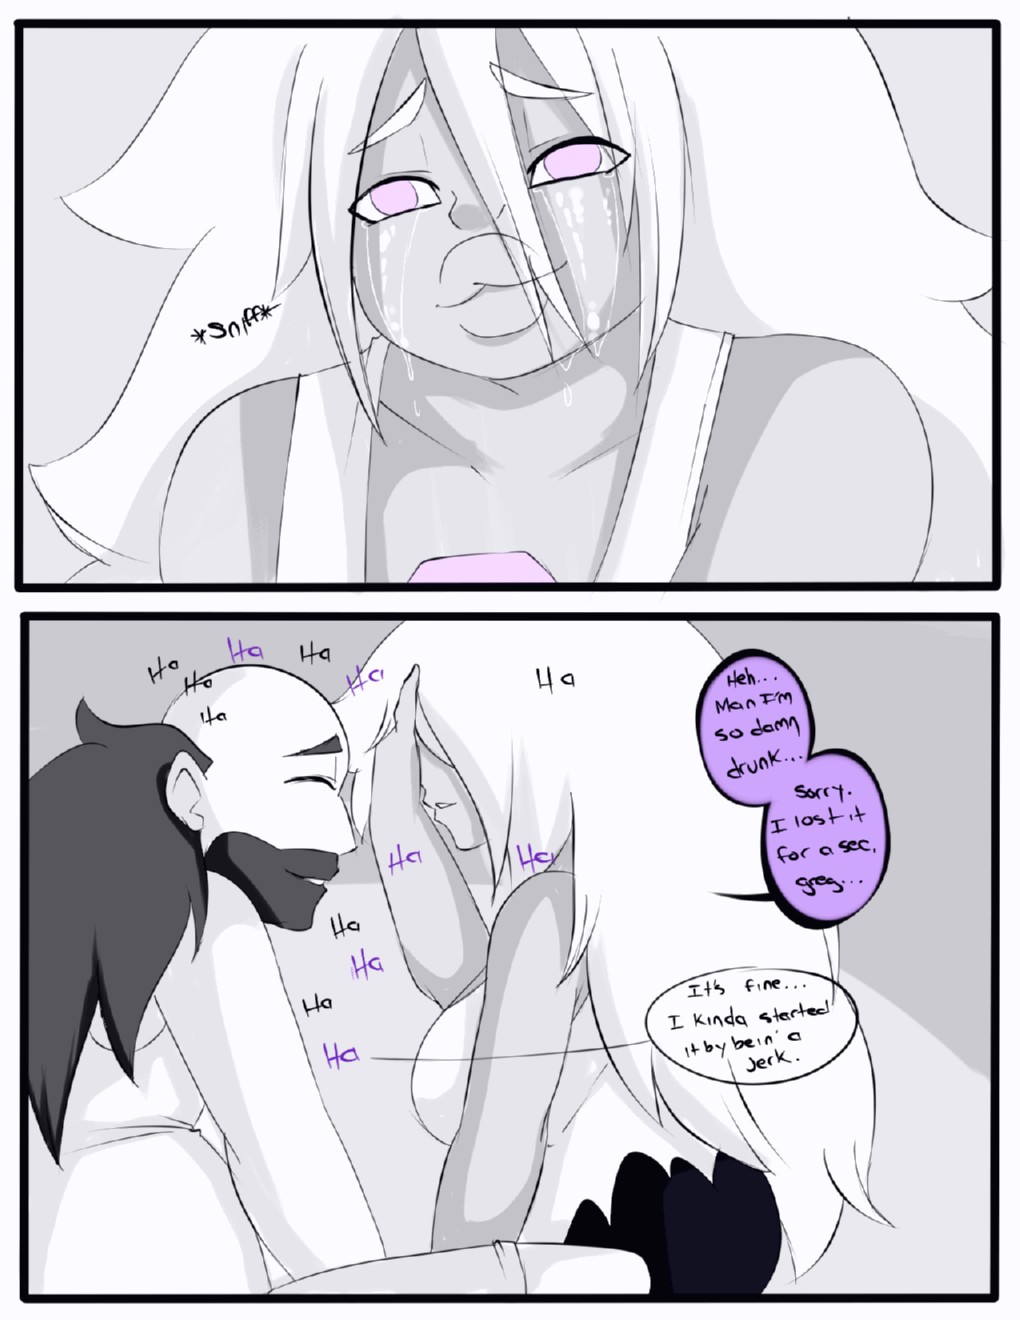 Amethyst's drinking problem porn comic page 006